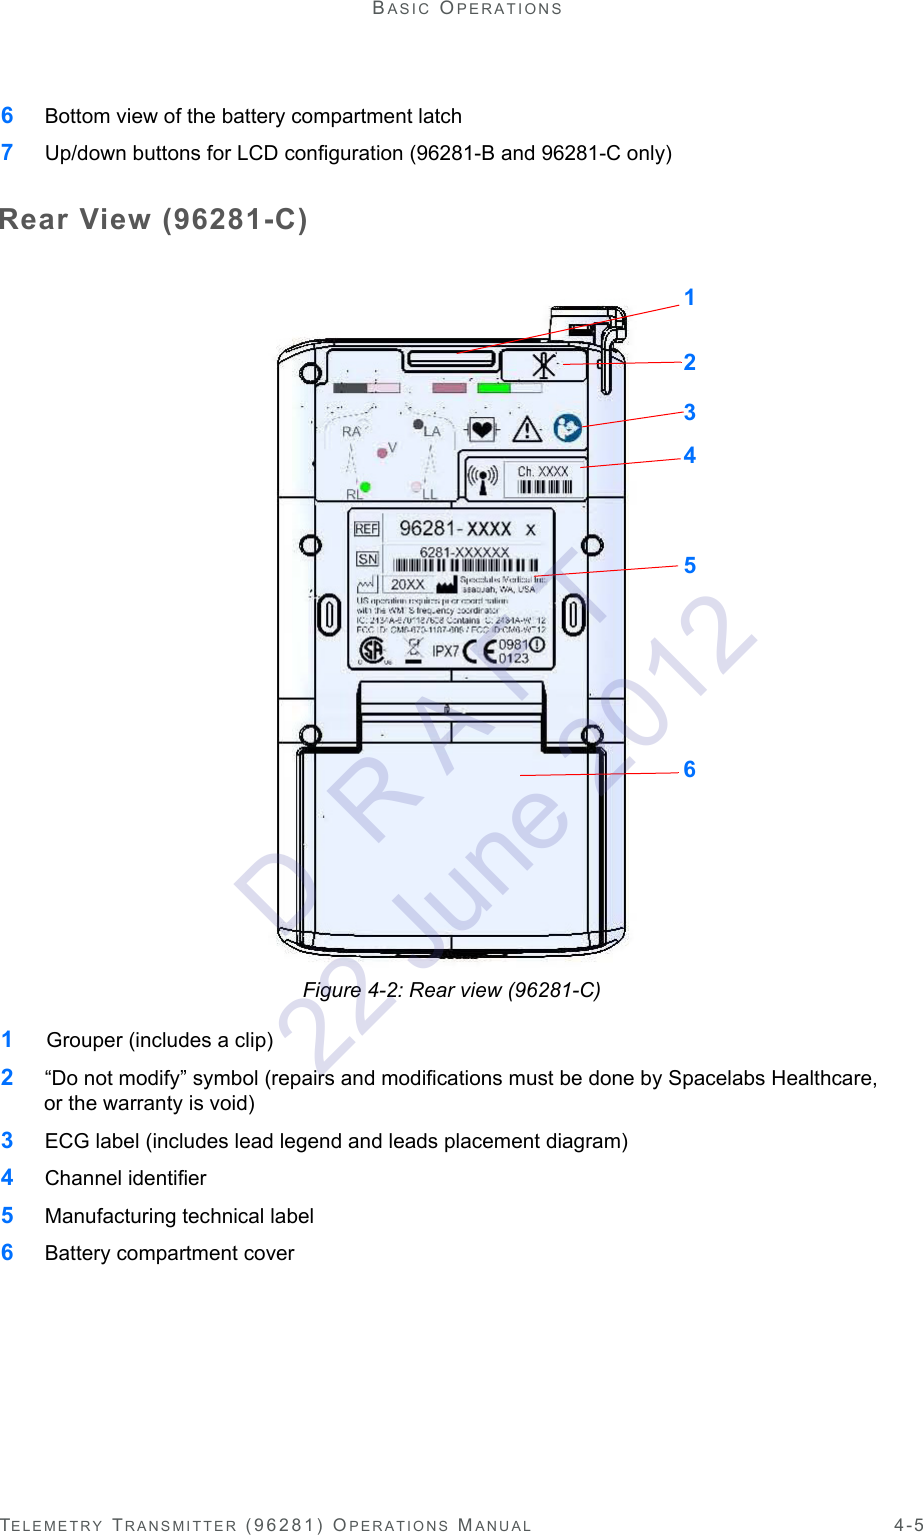 TELEMETRY TRANSMITTER (96281) OPERATIONS MANUAL 4-5BASIC OPERATIONS6 Bottom view of the battery compartment latch7 Up/down buttons for LCD configuration (96281-B and 96281-C only)Rear View (96281-C)Figure 4-2: Rear view (96281-C)1  Grouper (includes a clip)2 “Do not modify” symbol (repairs and modifications must be done by Spacelabs Healthcare, or the warranty is void)3 ECG label (includes lead legend and leads placement diagram)4 Channel identifier5 Manufacturing technical label6 Battery compartment cover123456D  R A F T 22 June 2012